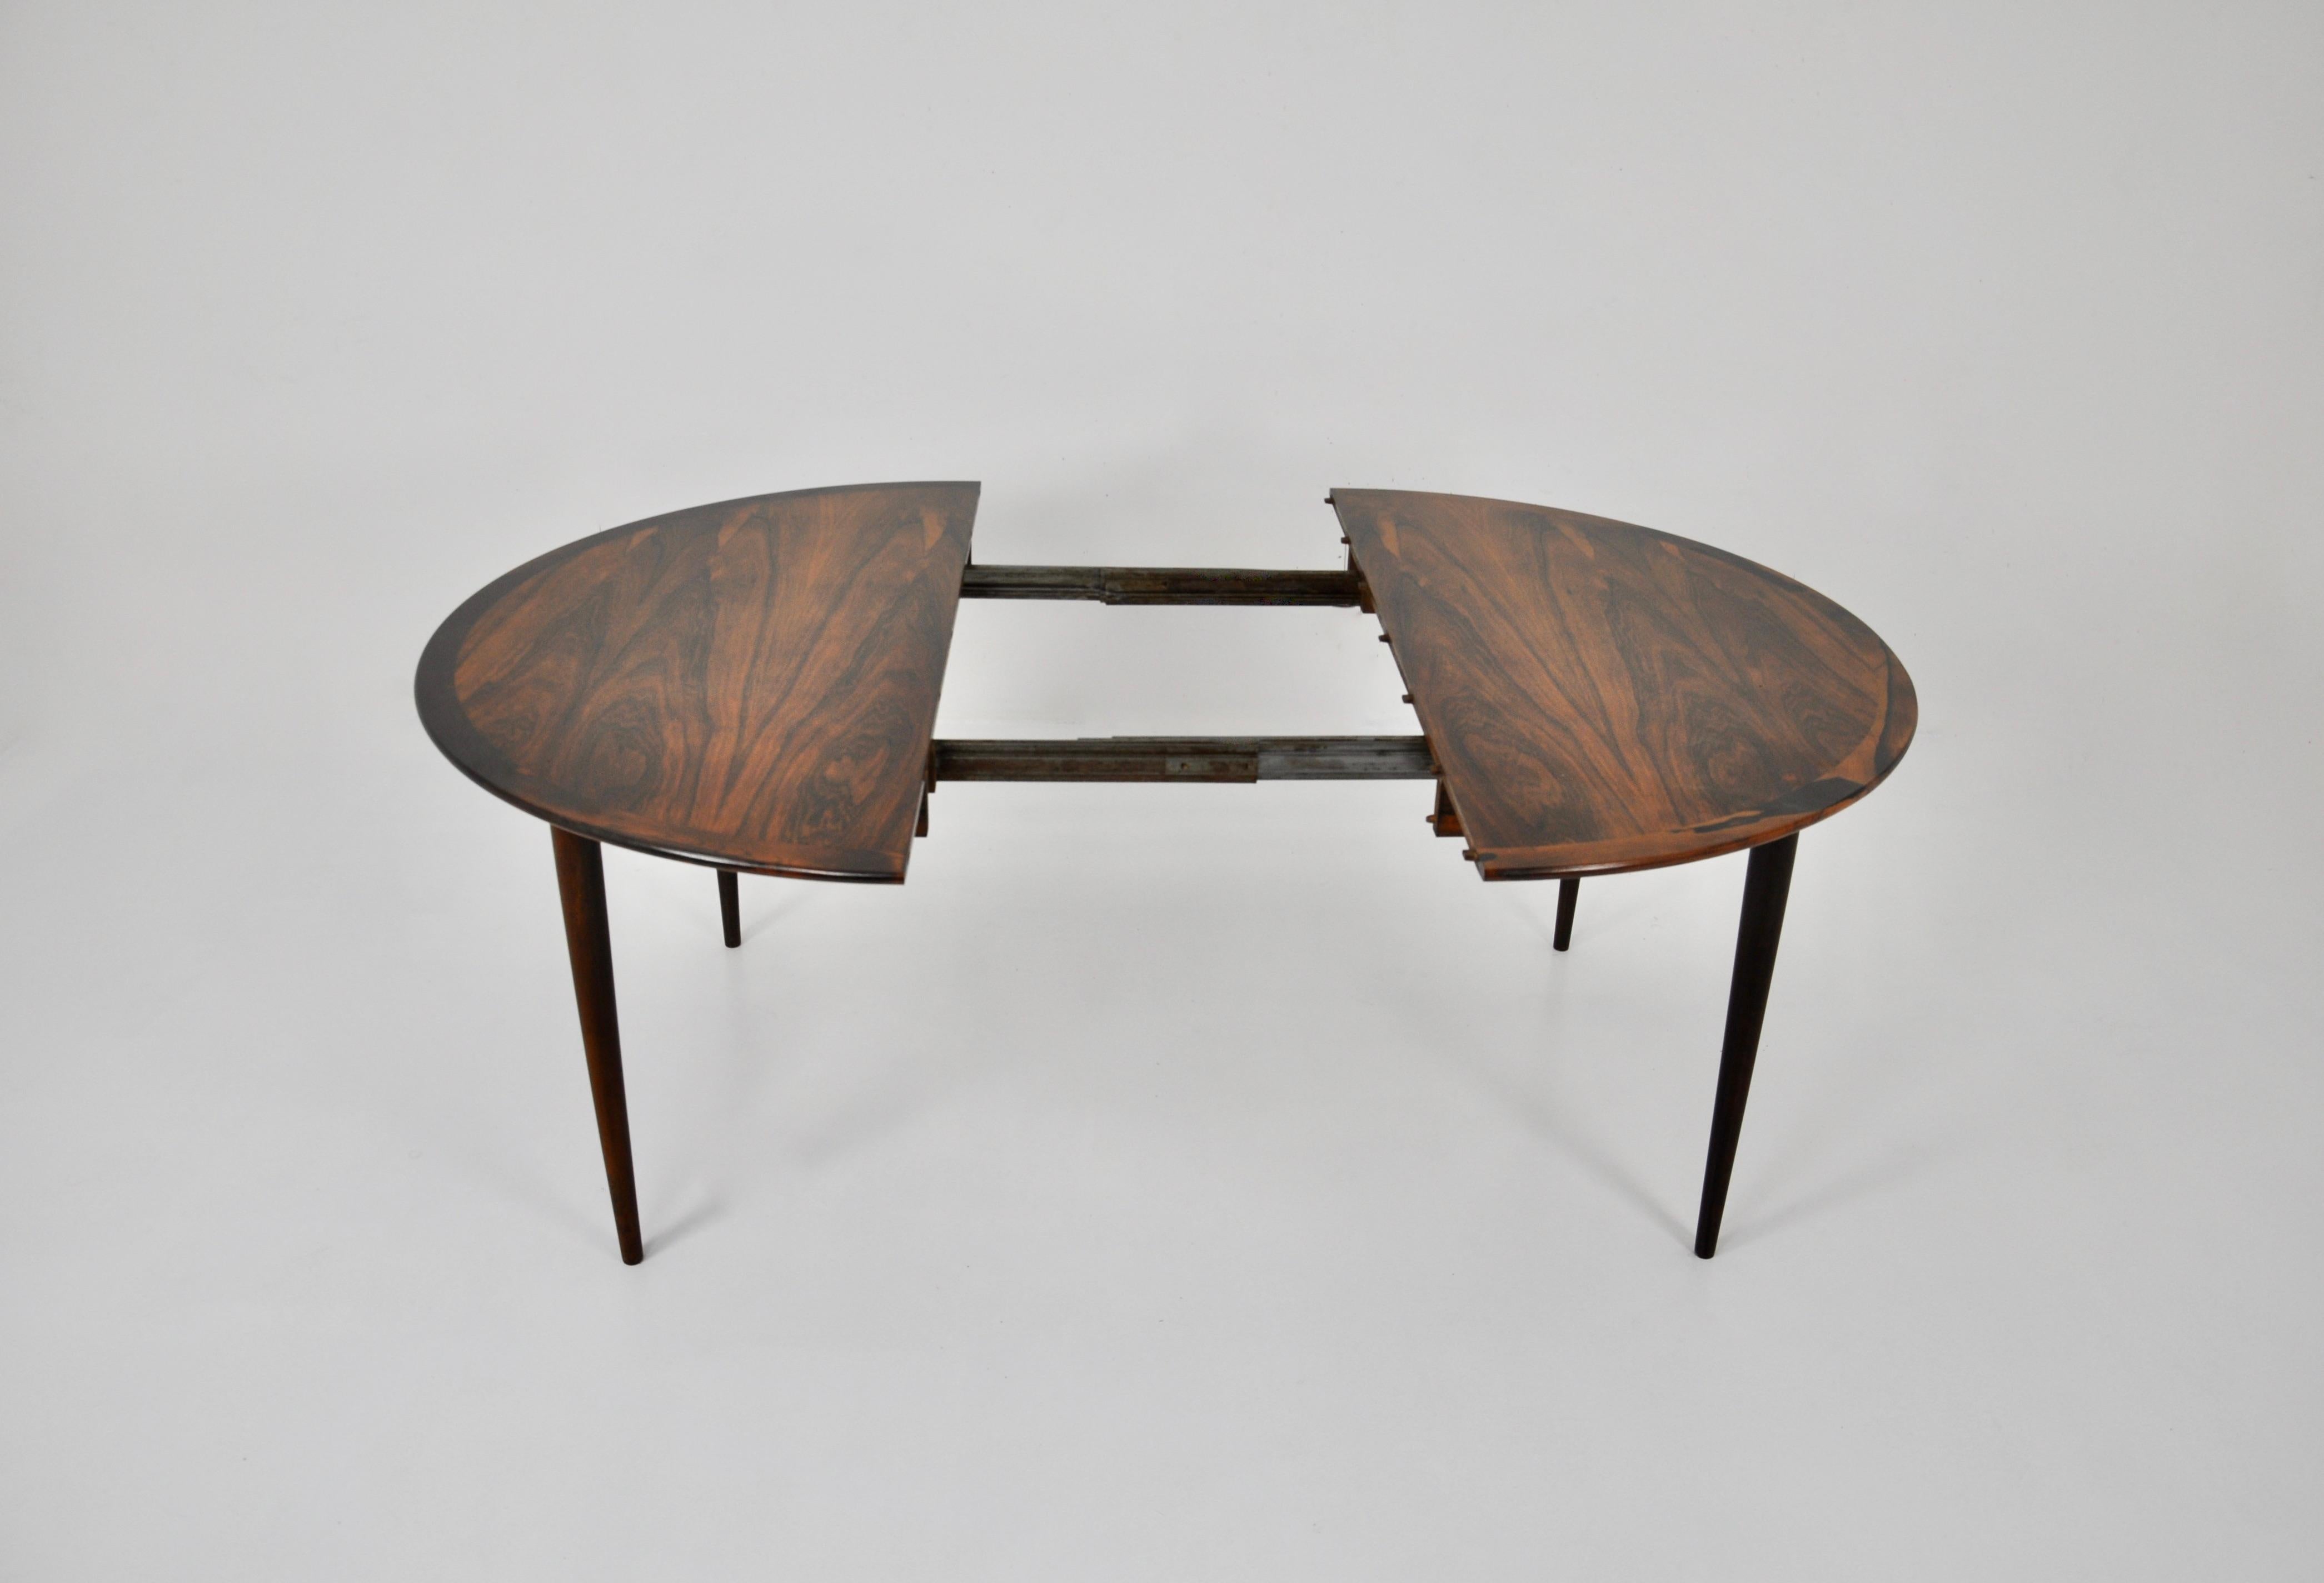 Wood Round Dining Table by Grete Jalk for CJ Rosengaarden, 1960s For Sale